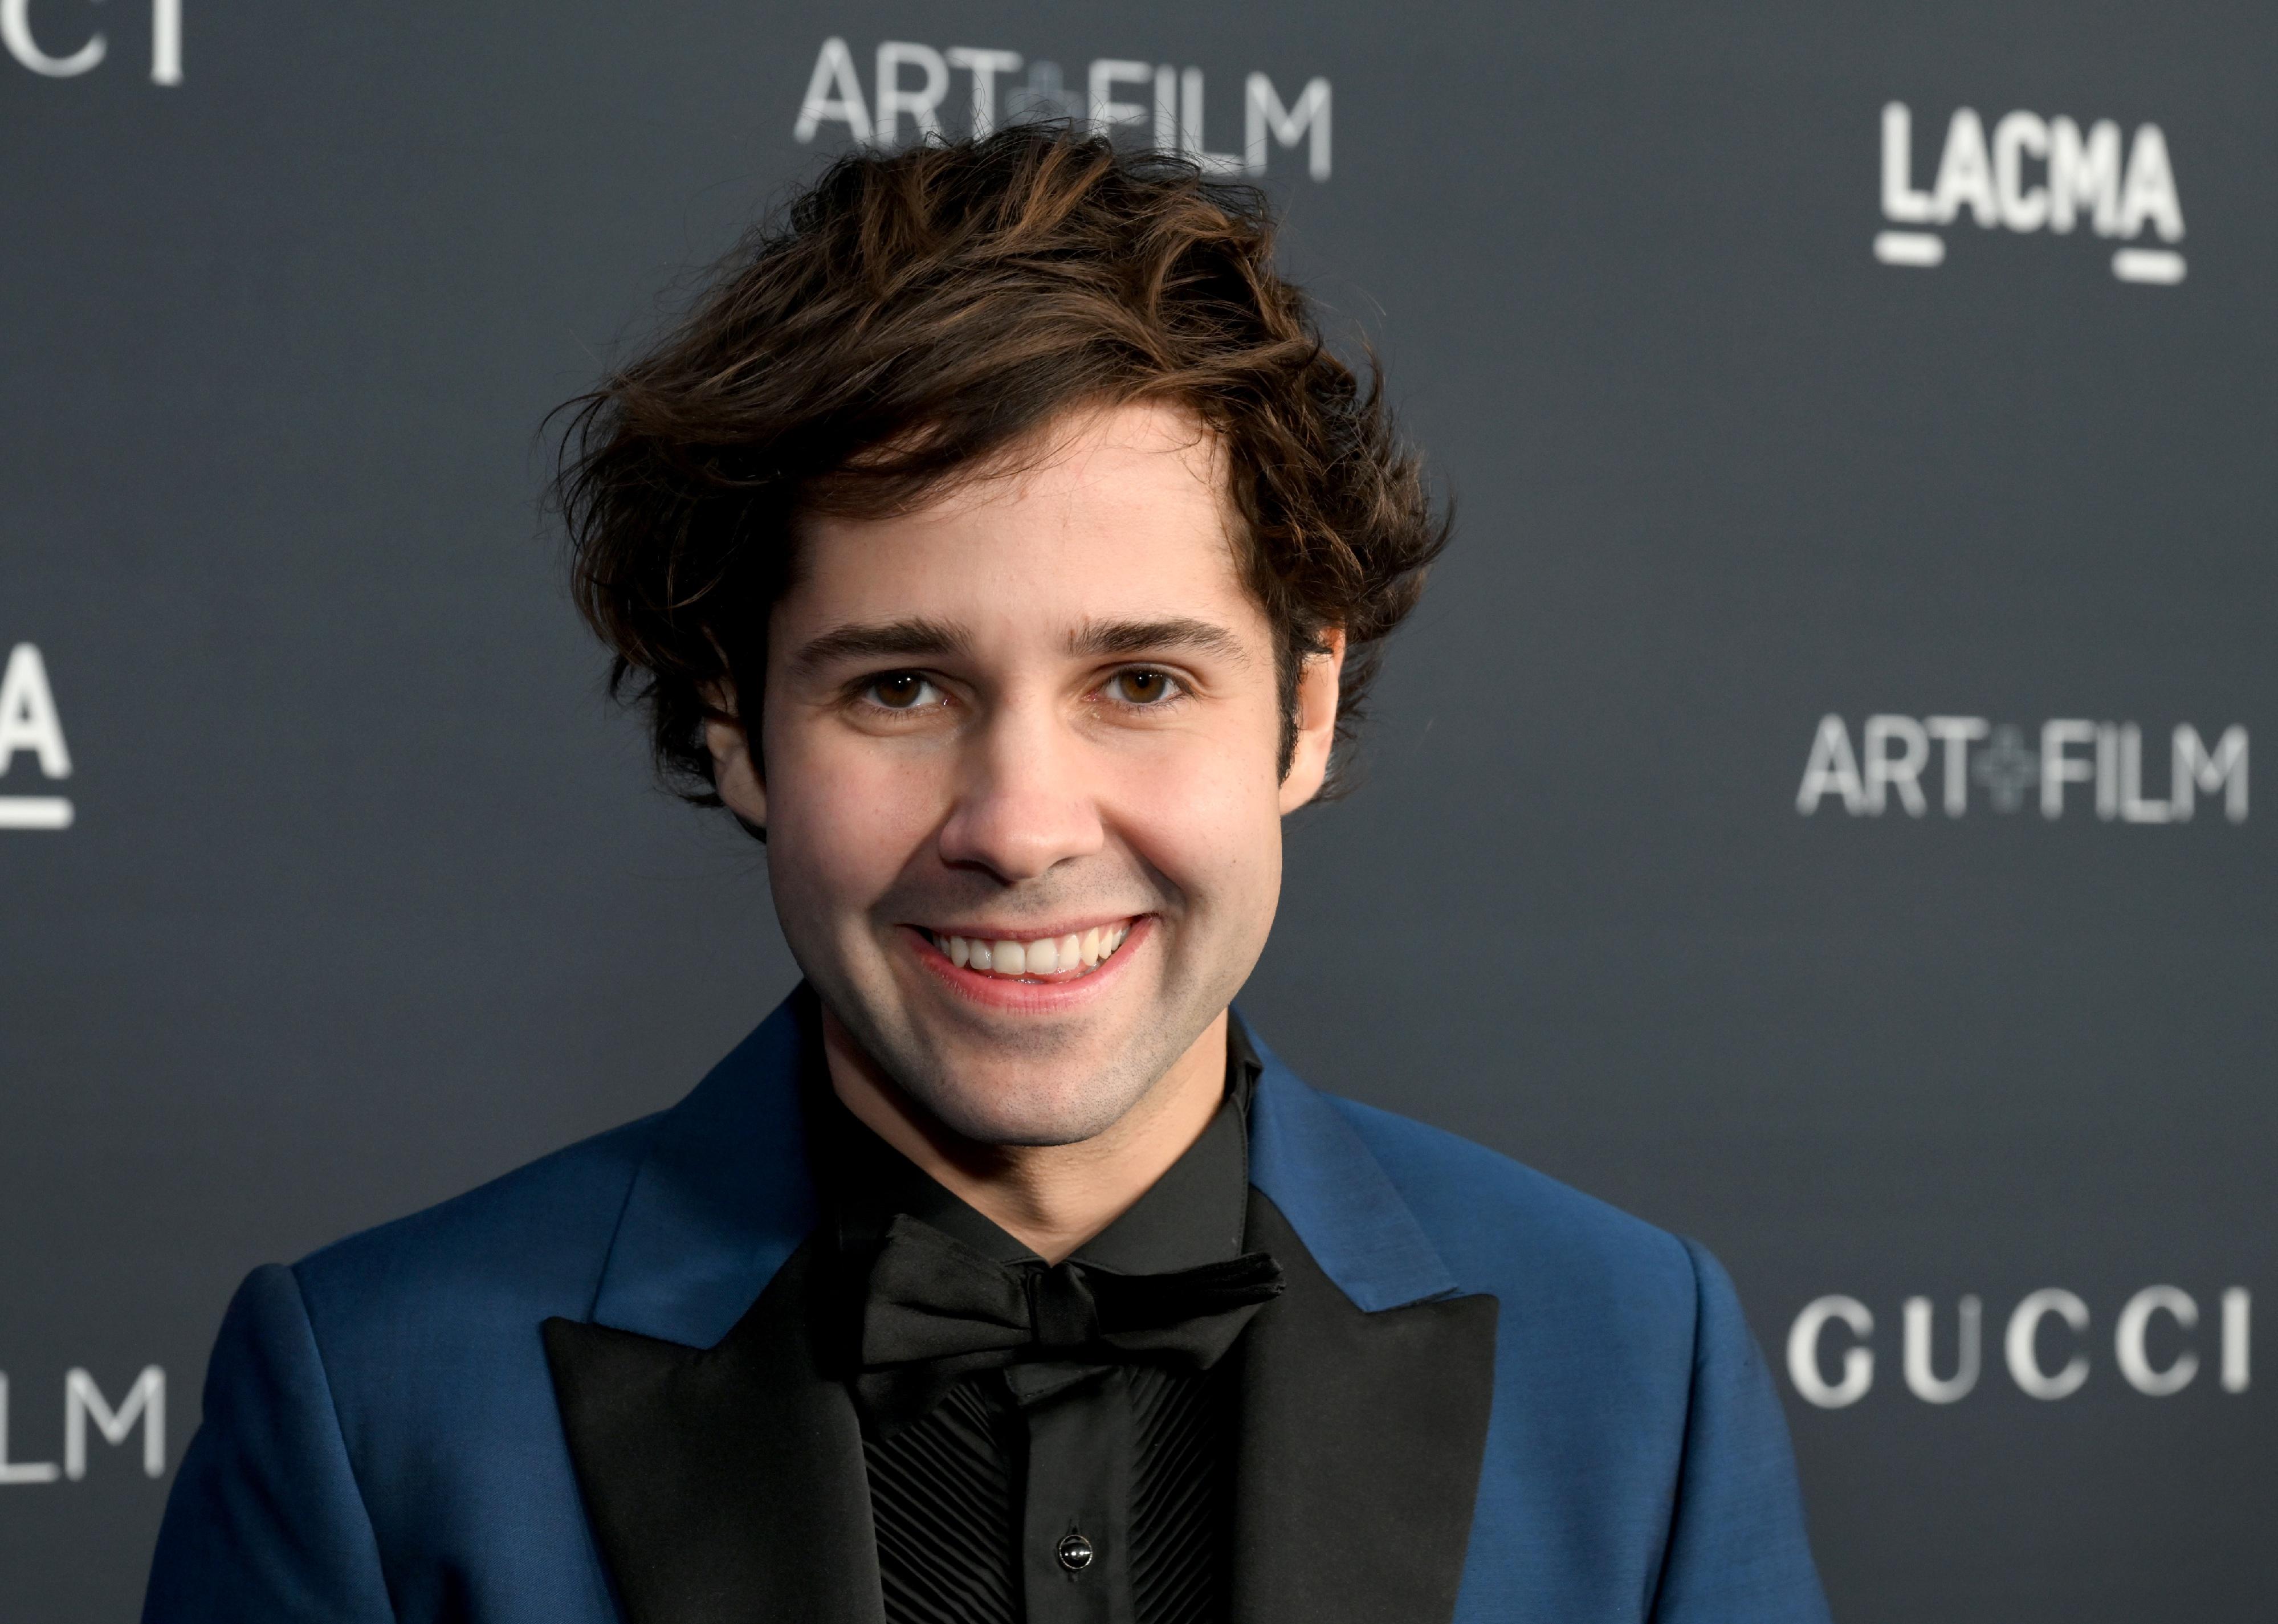 David Dobrik in a blue-and-black suit and bowtie.